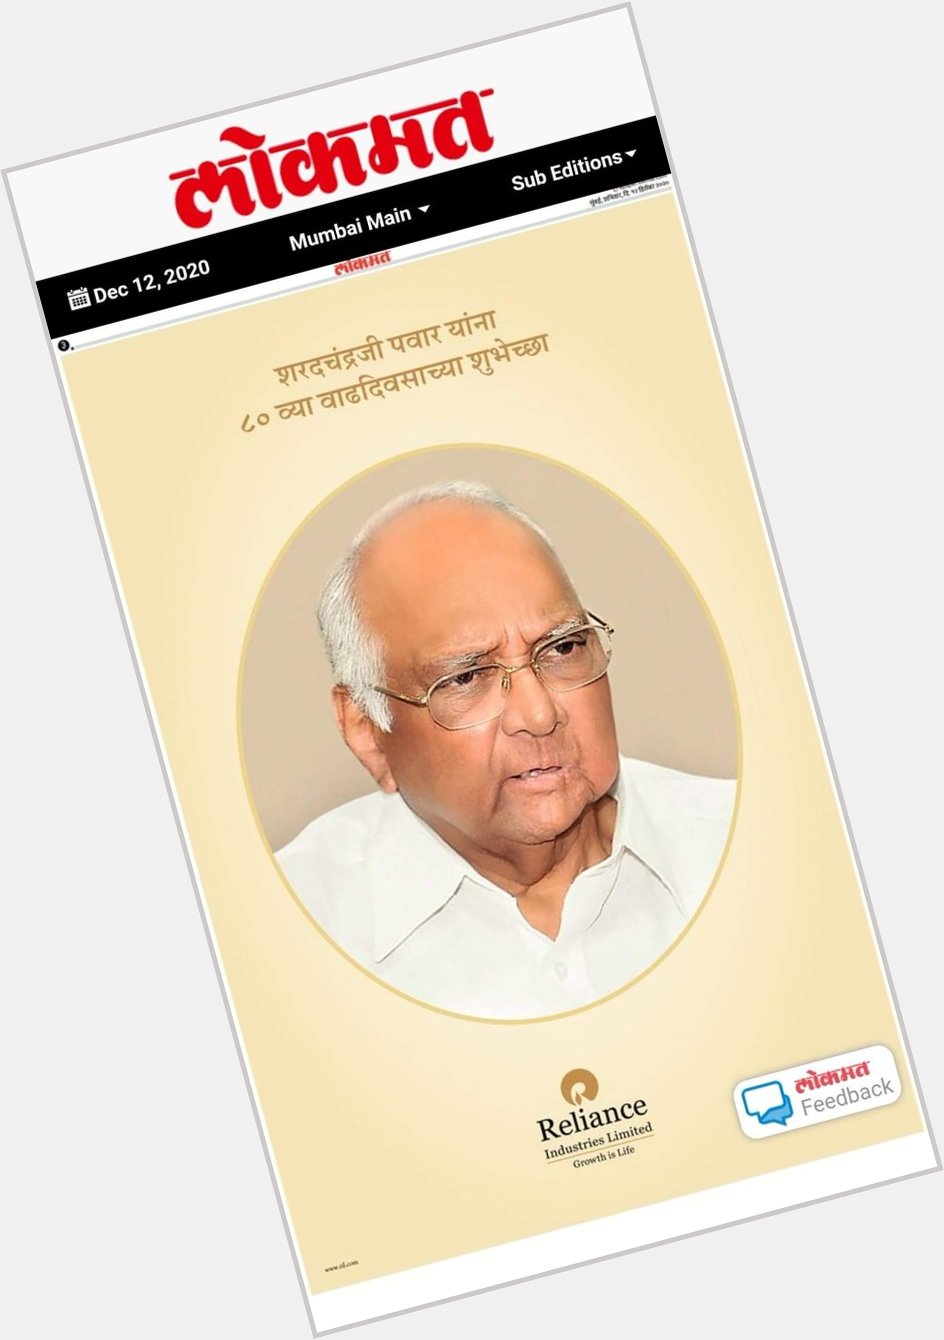 There workers keep Abusing Ambani.

Ambani books an entire Page in News Paper to wish Sharad Pawar a Happy Birthday. 